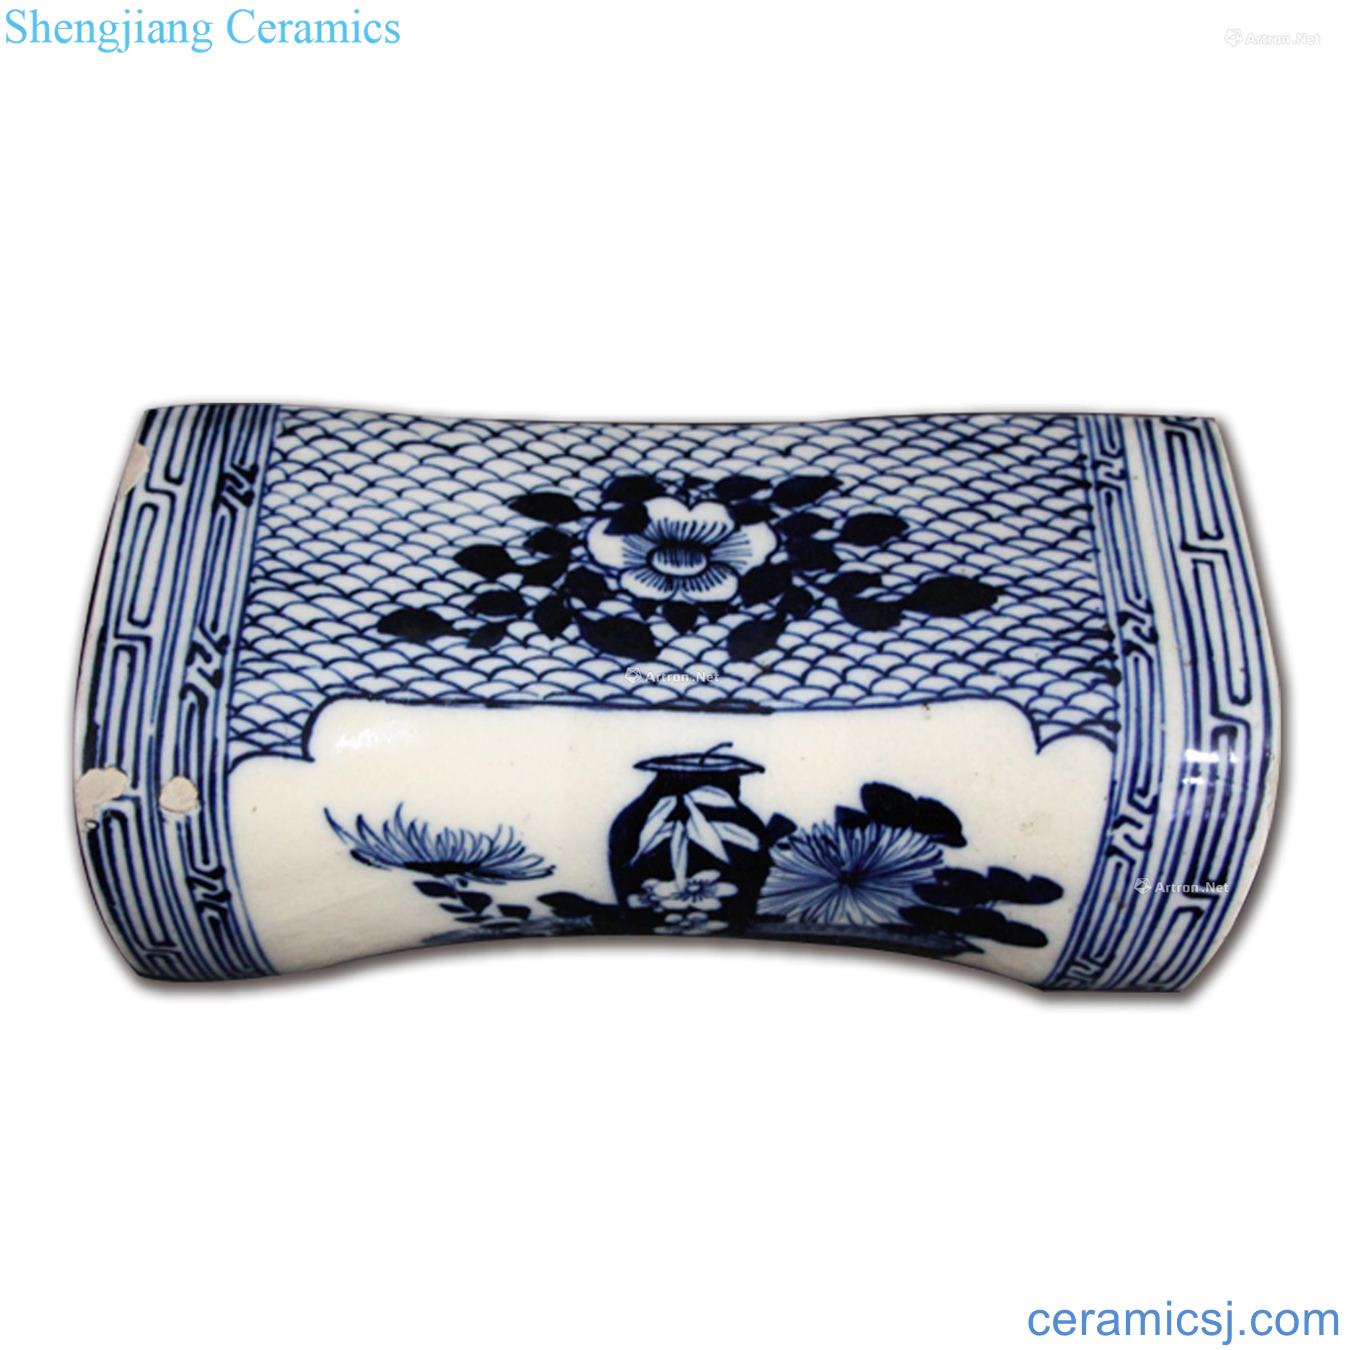 The yuan dynasty blue and white porcelain pillow